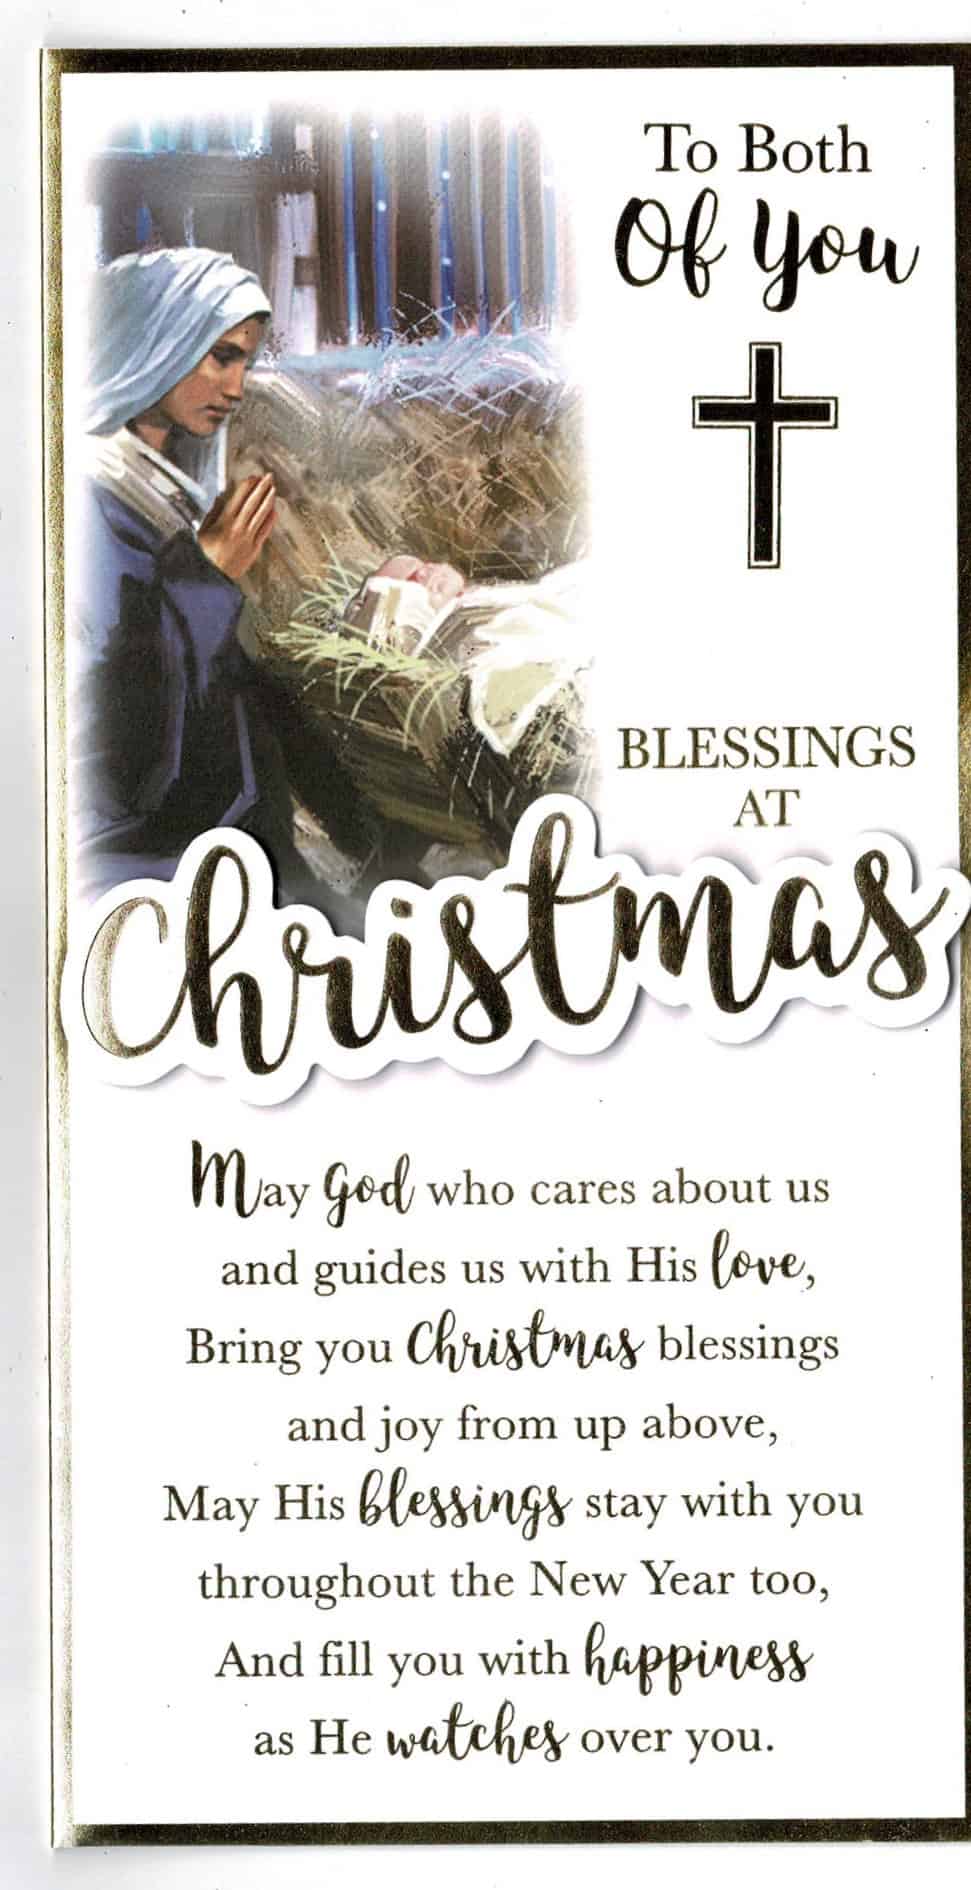 To Both Of You Christmas Card With Religious Theme | eBay